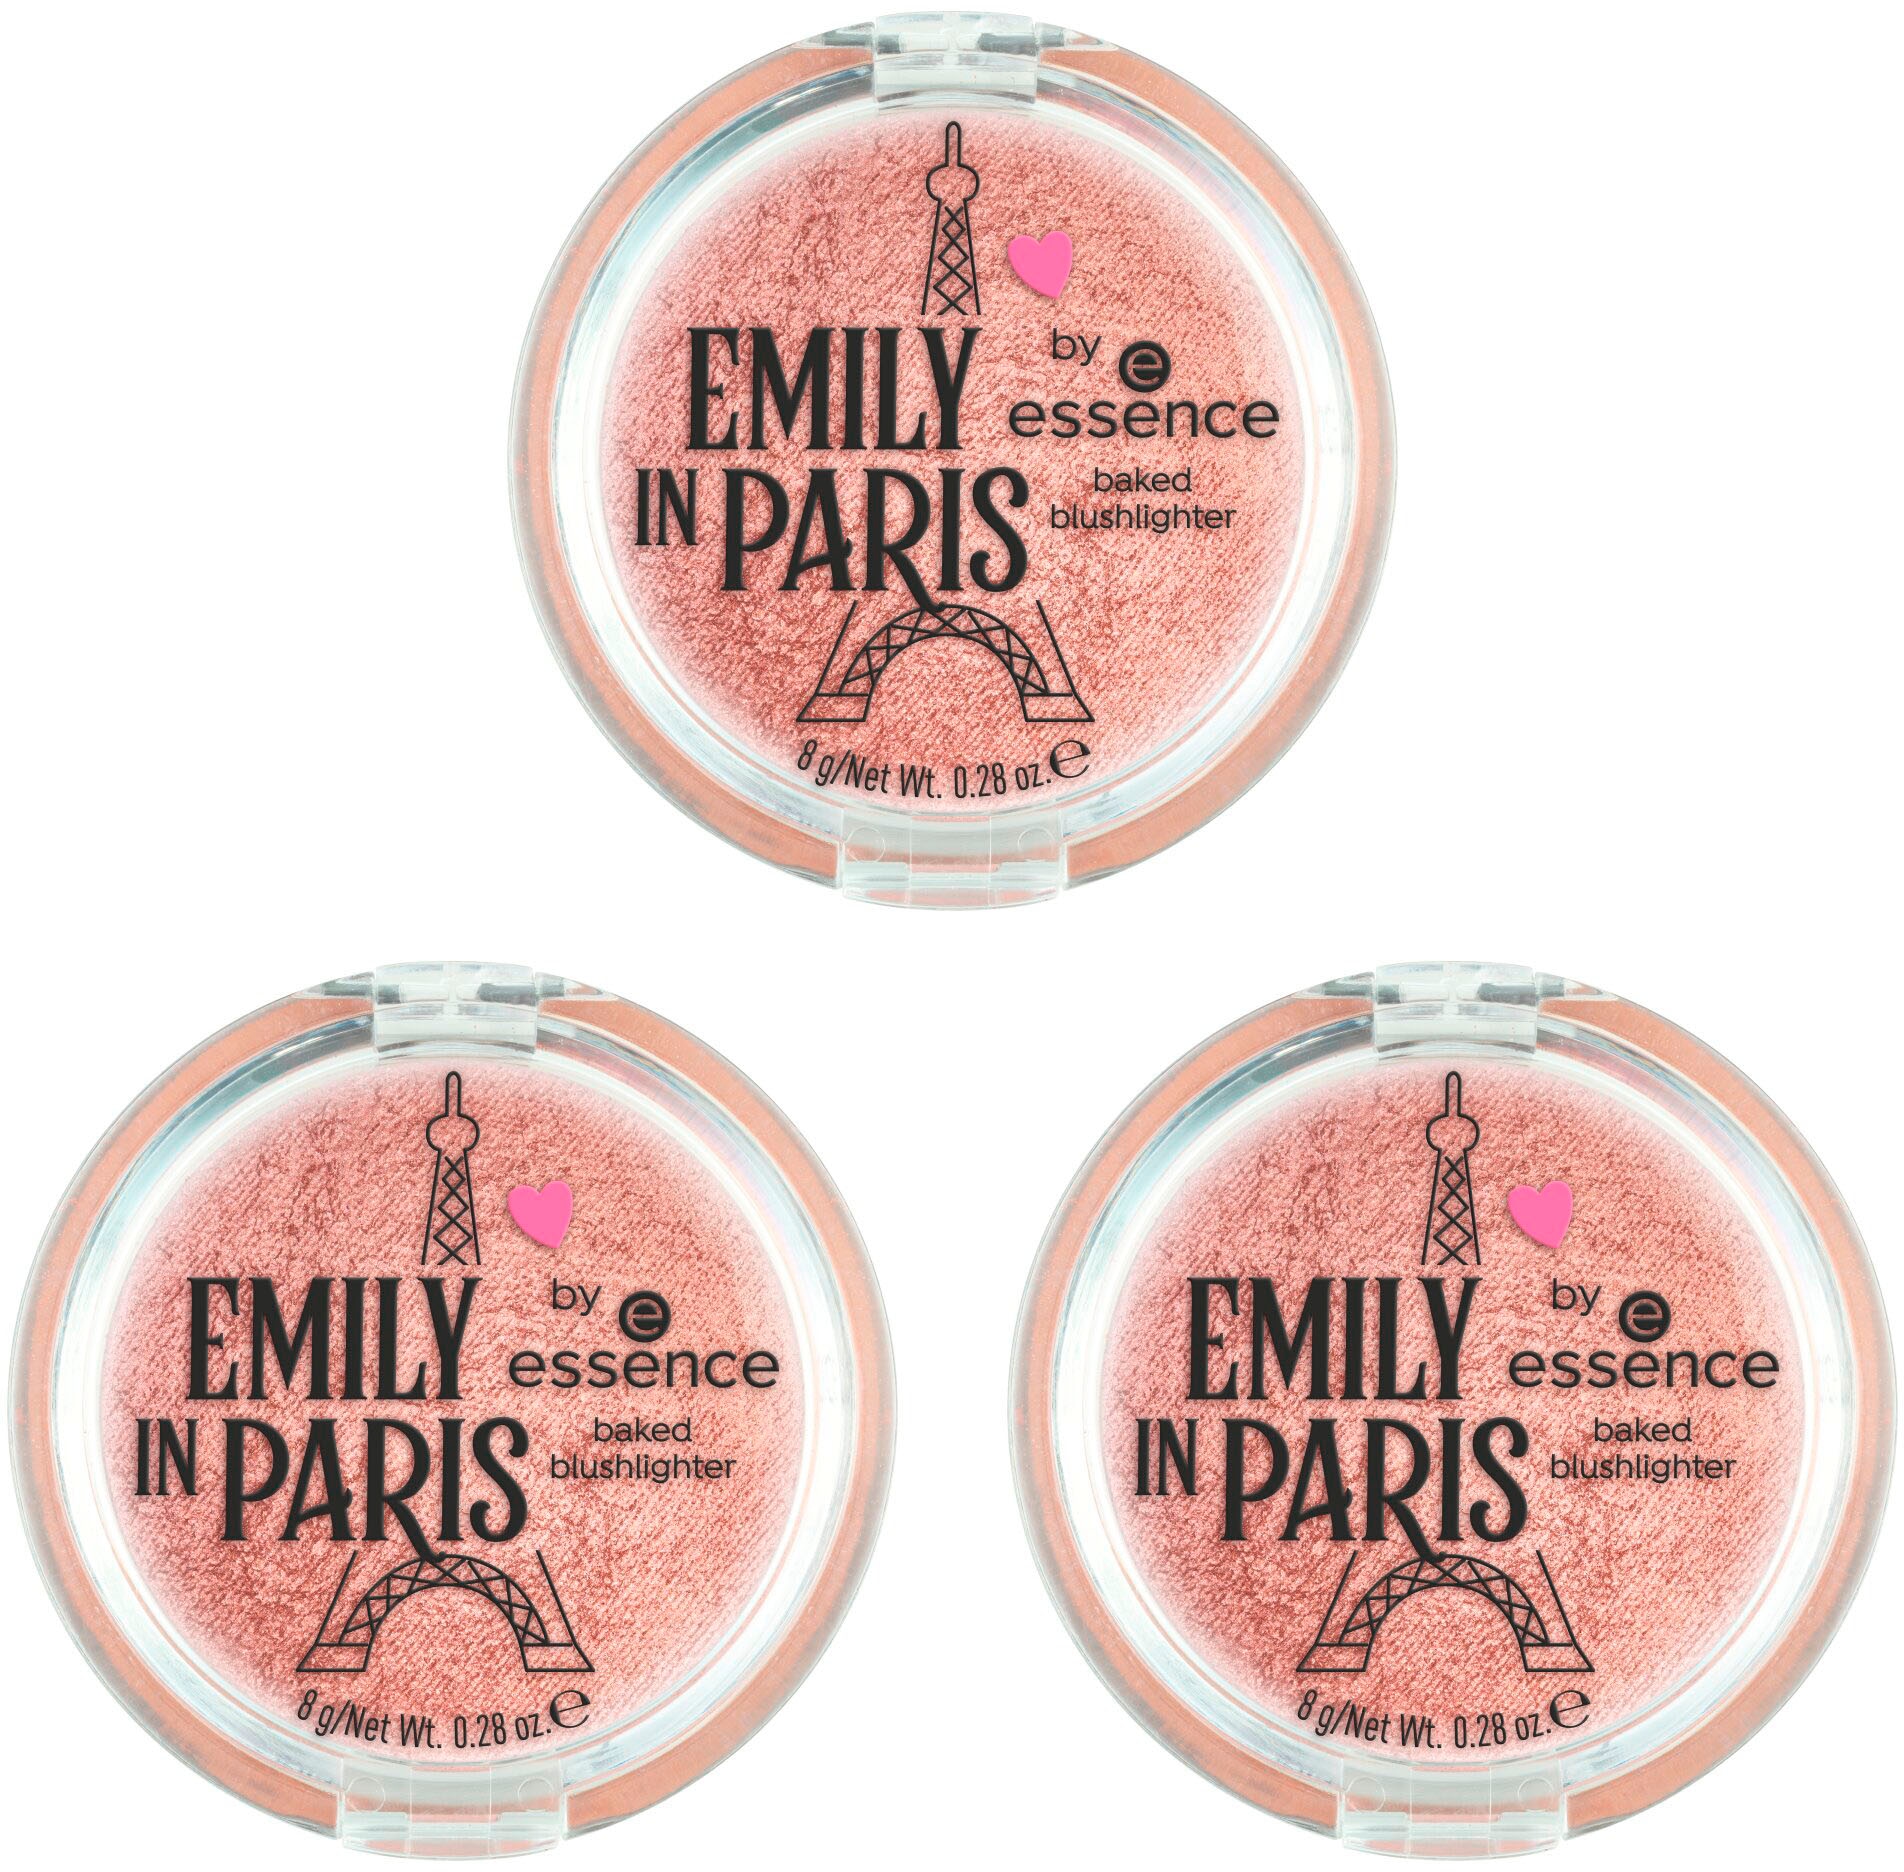 Essence Rouge »EMILY PARIS by IN baked UNIVERSAL online blushlighter« bei essence